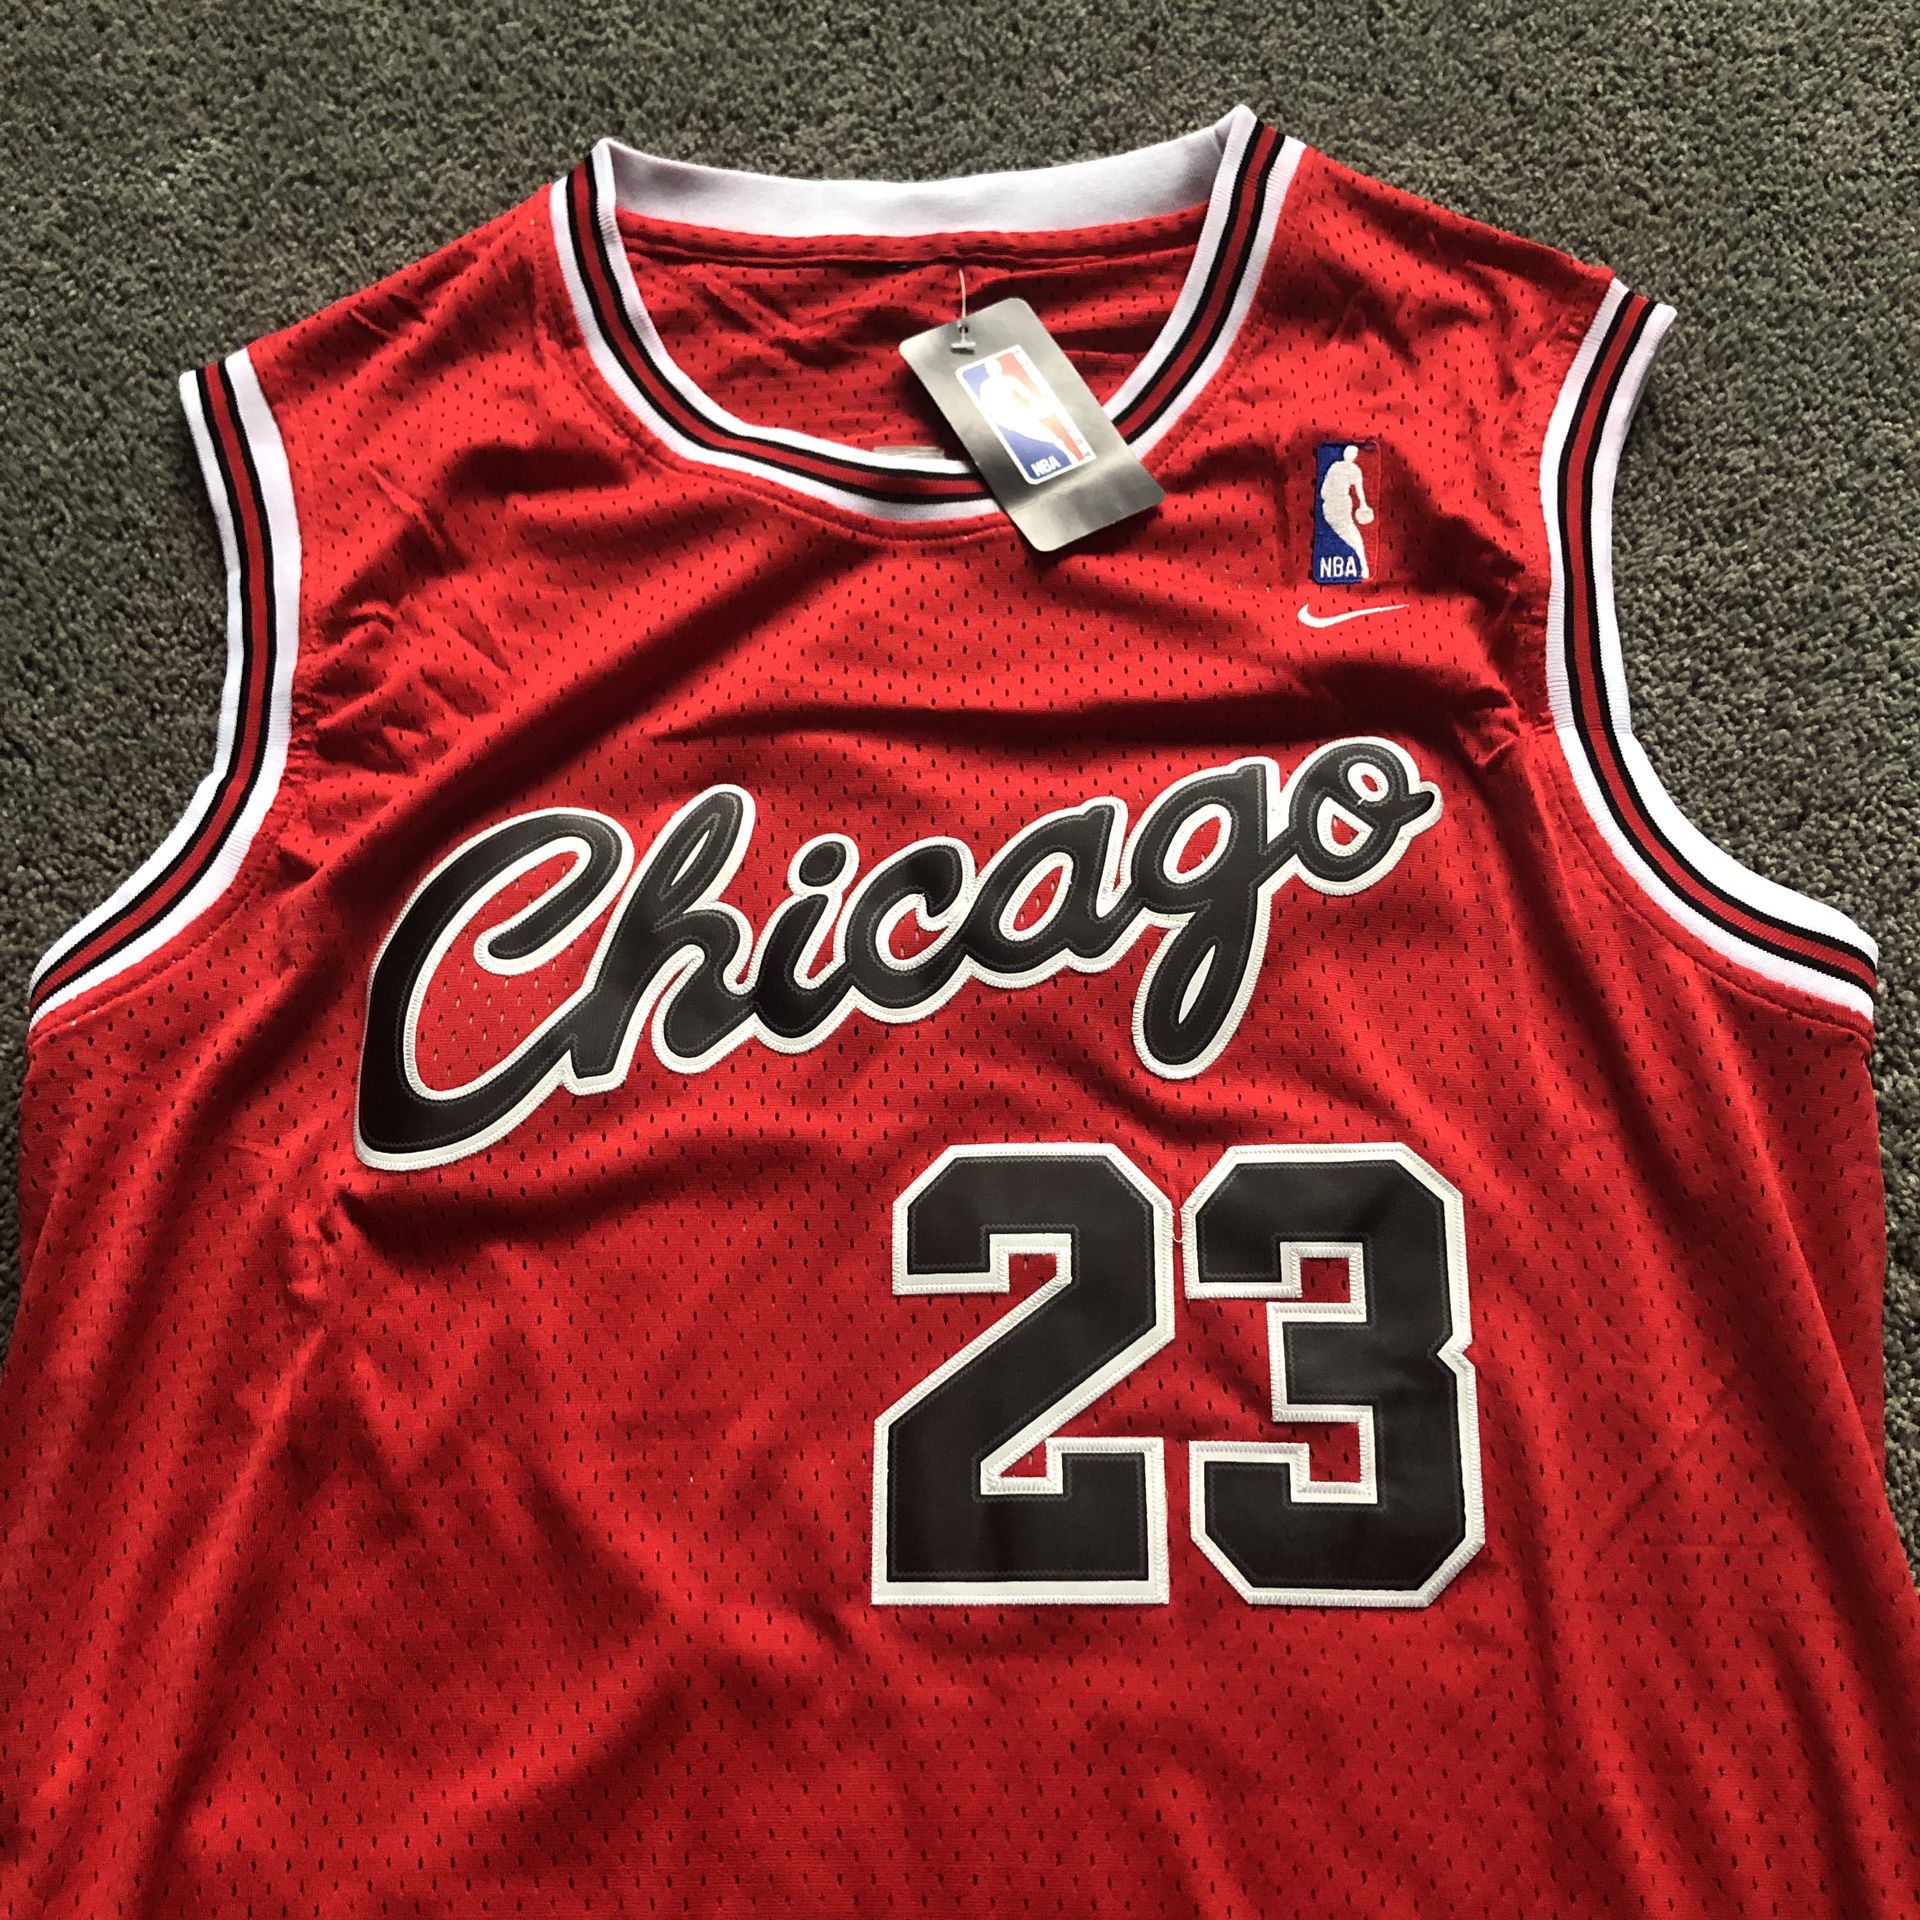 NEW! Michael Jordan #23 Chicago Bulls Retro Nike Edition Jersey Size: Large (L) - Meet Now or Ships Out Dame Day As Payment! 🏀💨